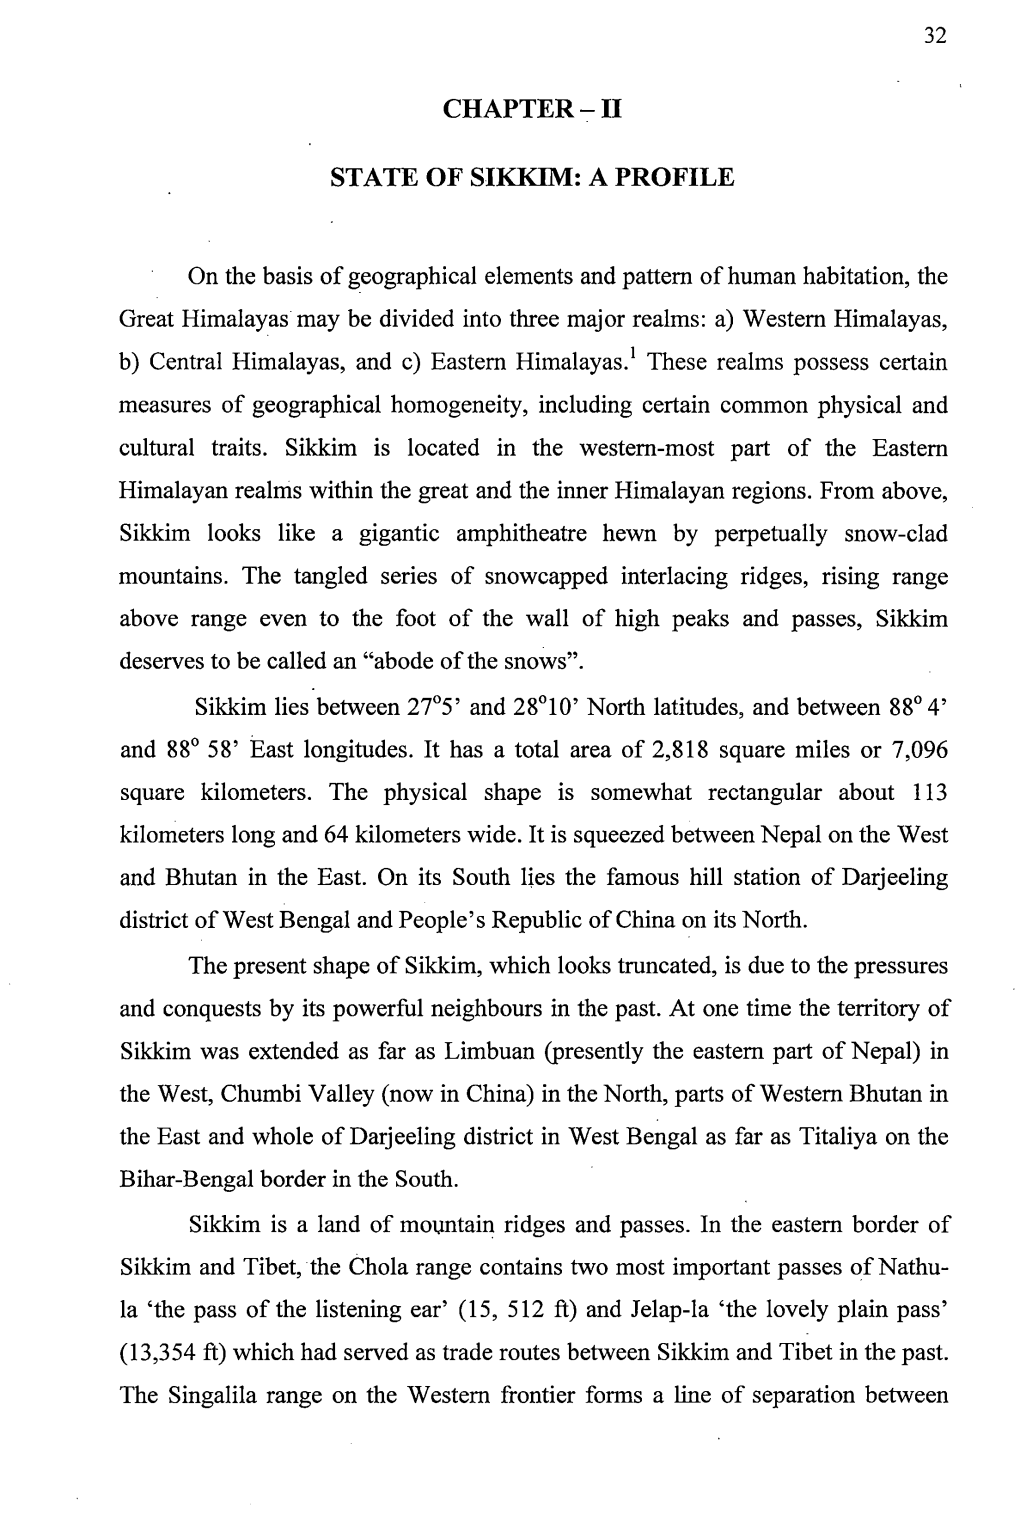 Chapter-Ii State of Sikkim